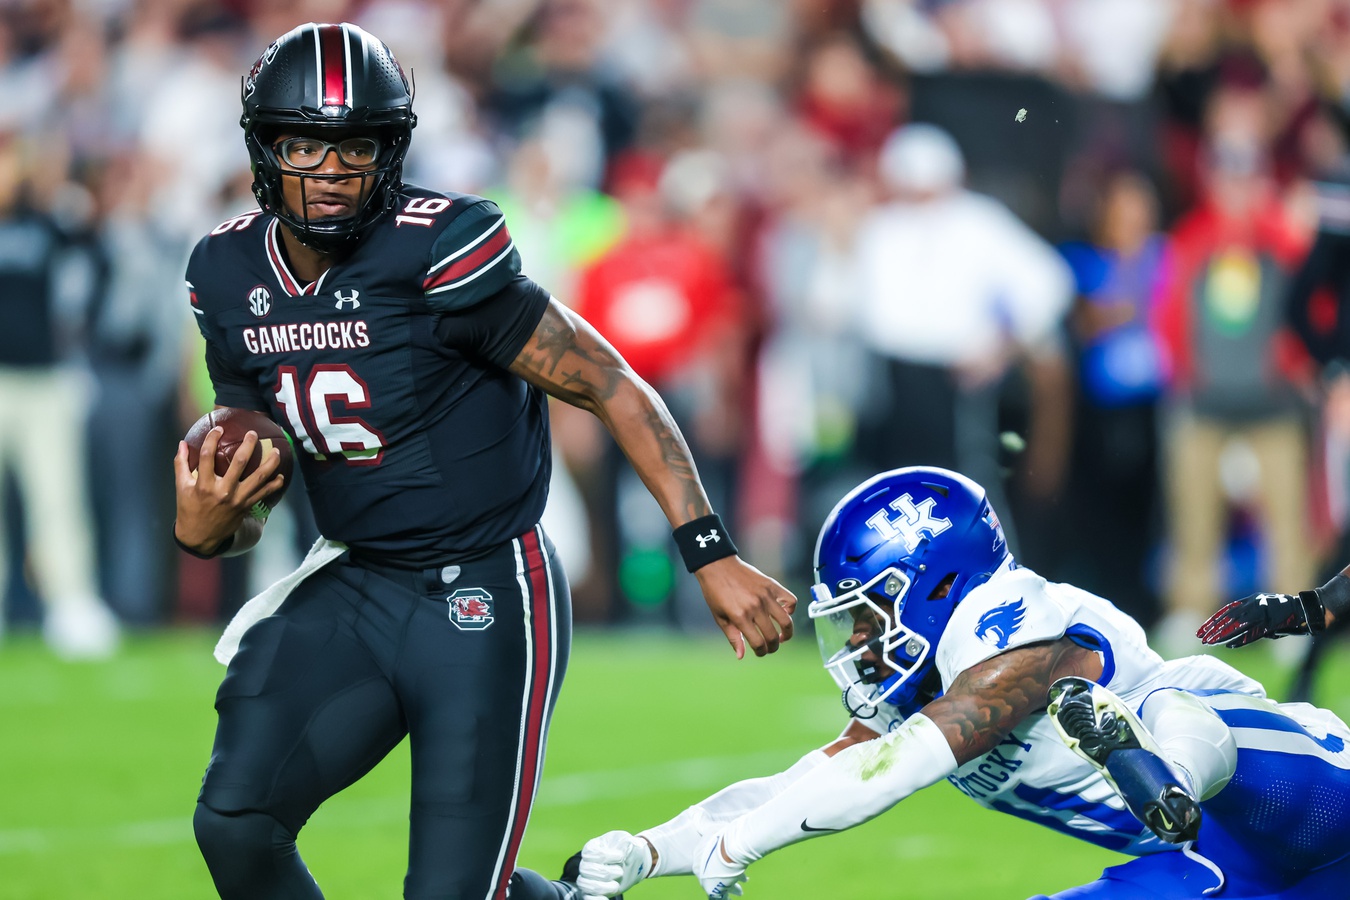 LaNorris Sellers was named the starting quarterback for the Gamecocks and there are many reasons to get excited about him in 2024.